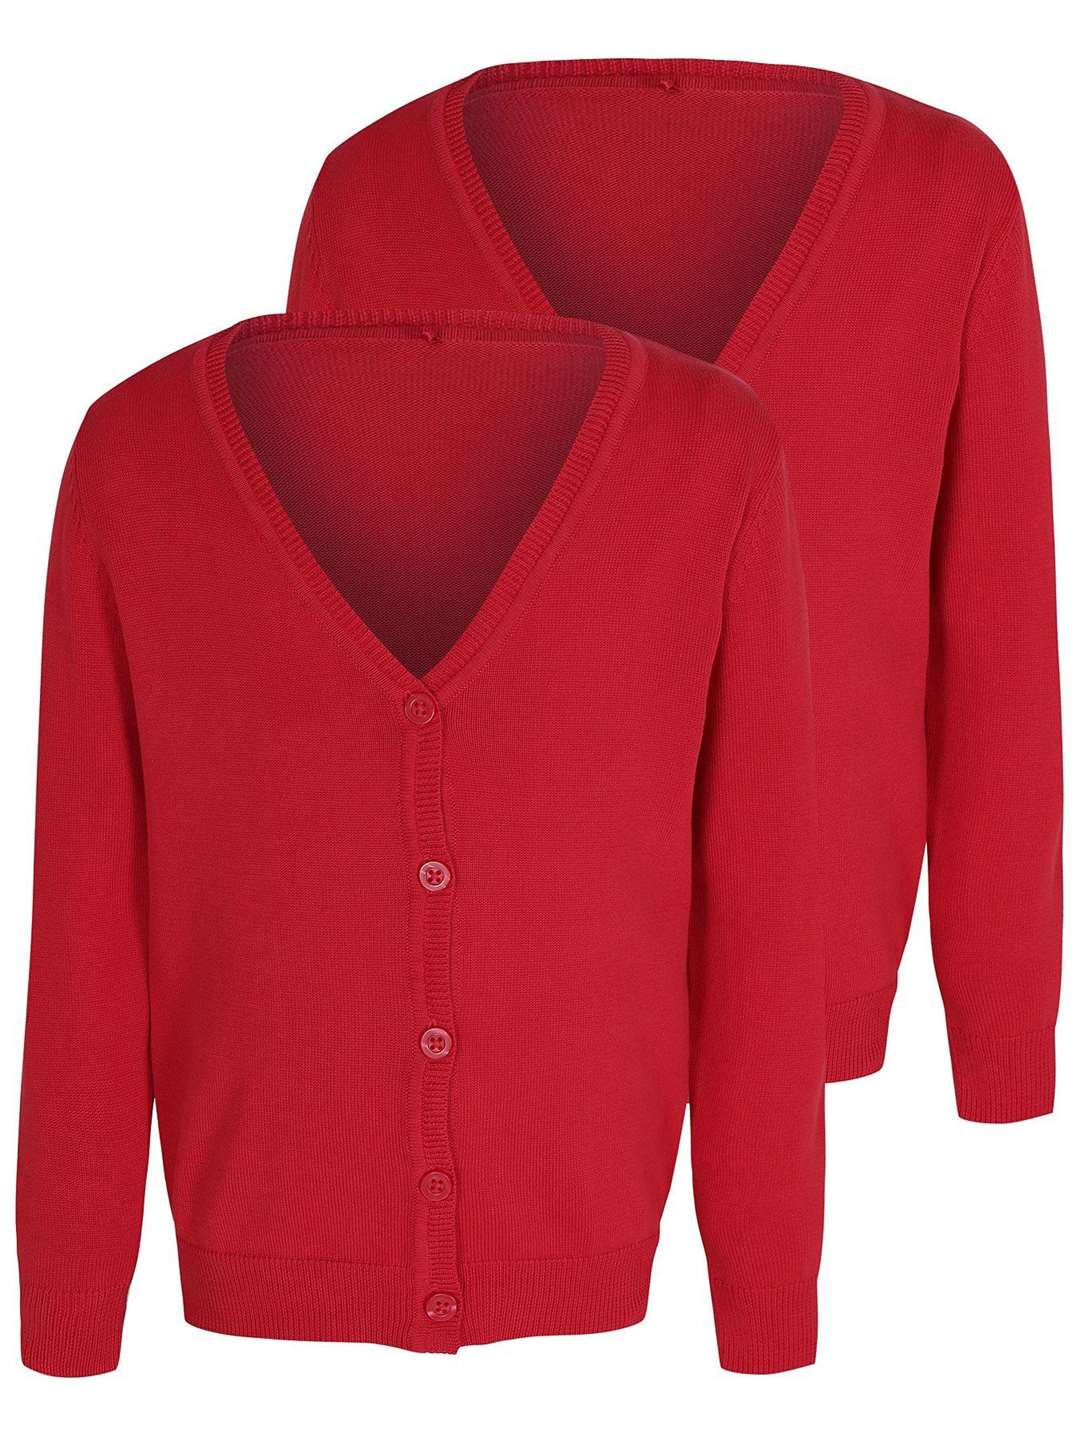 George at ASDA Girls Red School Cardigan 2 Pack from £8, George